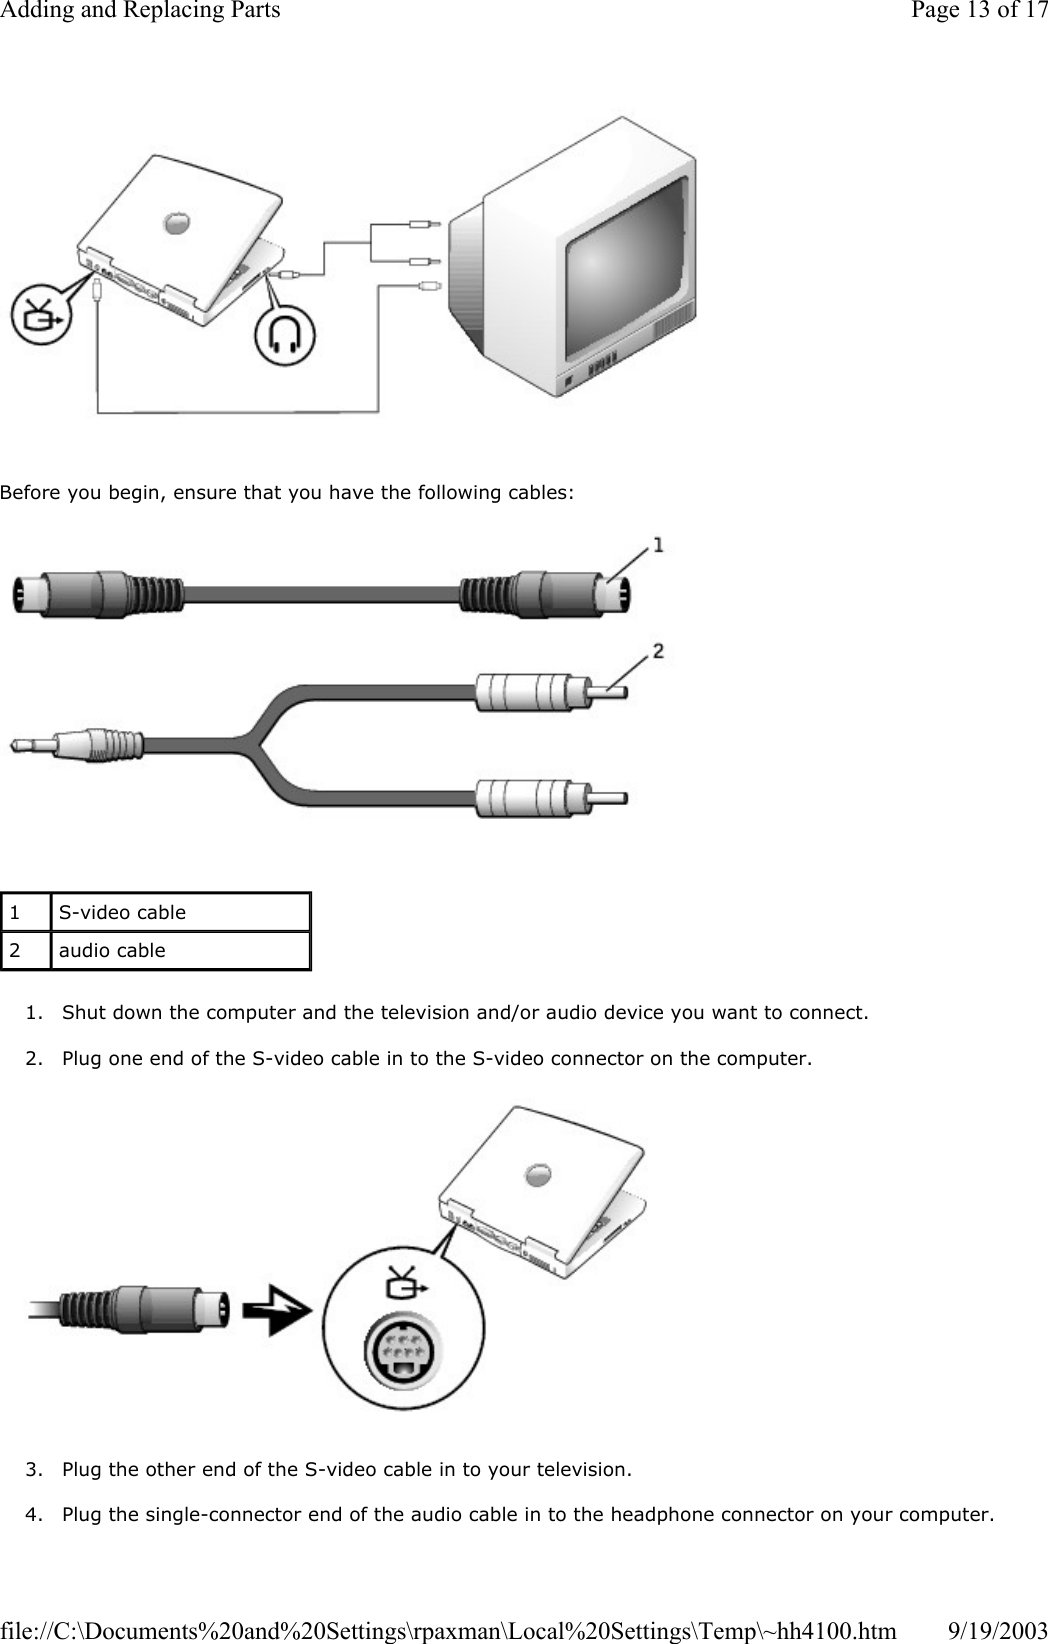   Before you begin, ensure that you have the following cables:   1. Shut down the computer and the television and/or audio device you want to connect.  2. Plug one end of the S-video cable in to the S-video connector on the computer.    3. Plug the other end of the S-video cable in to your television.  4. Plug the single-connector end of the audio cable in to the headphone connector on your computer. 1  S-video cable 2  audio cable Page 13 of 17Adding and Replacing Parts9/19/2003file://C:\Documents%20and%20Settings\rpaxman\Local%20Settings\Temp\~hh4100.htm